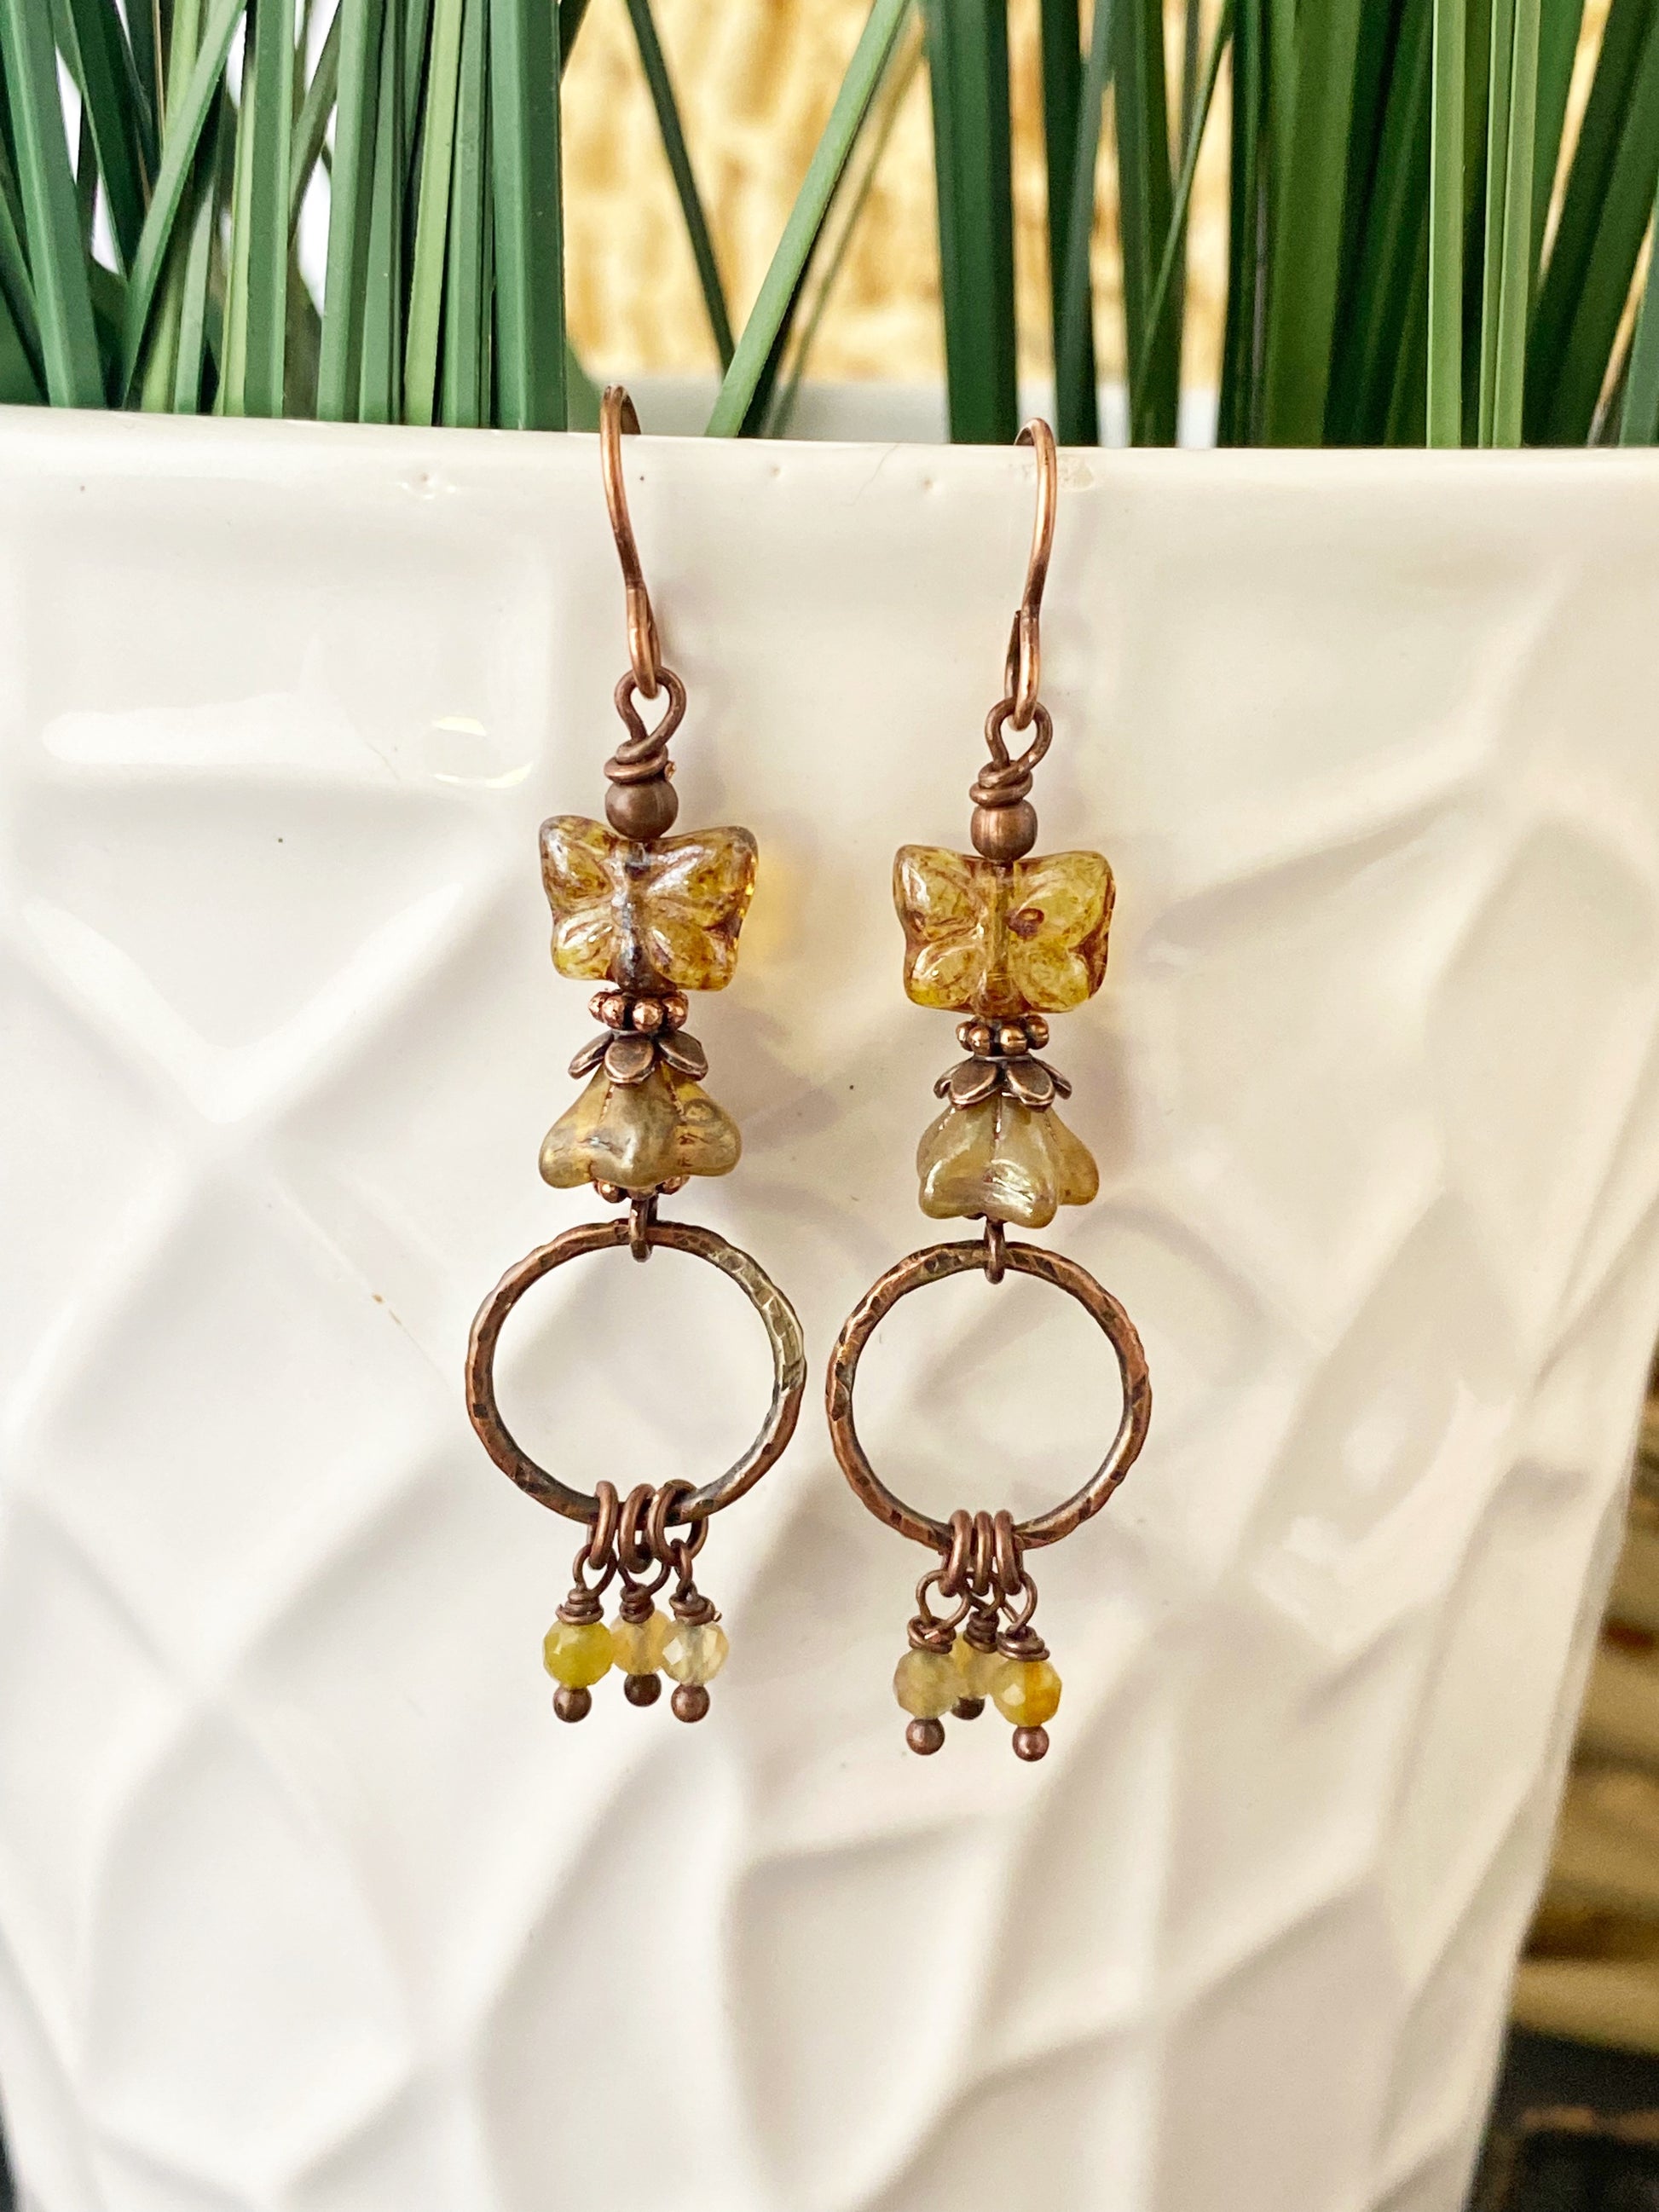 Butterfly Czech glass, citrine stone and copper metal earrings - Andria Bieber Designs 